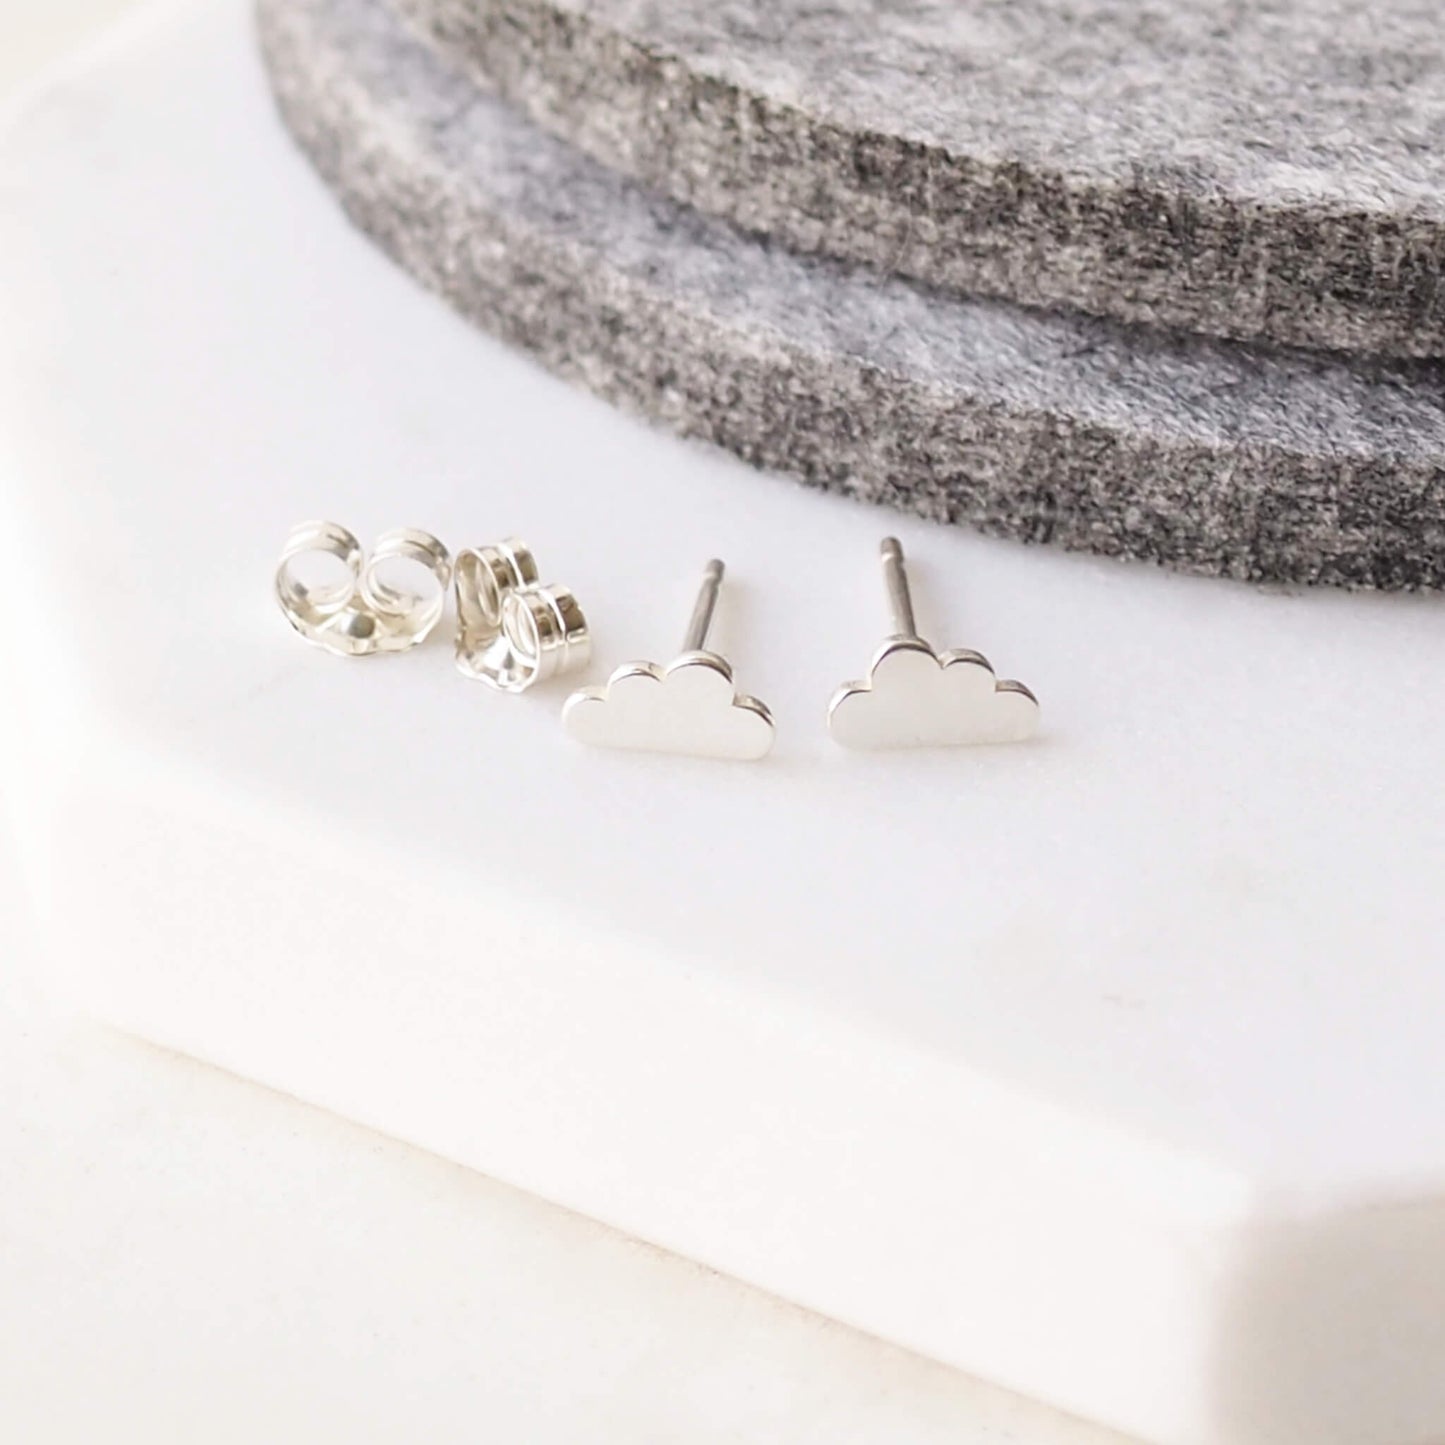 Little cloud earrings in Sterling Silver pictured with butterfly back. available at maram jewellery, a small indie jeweller in Edinburgh UK